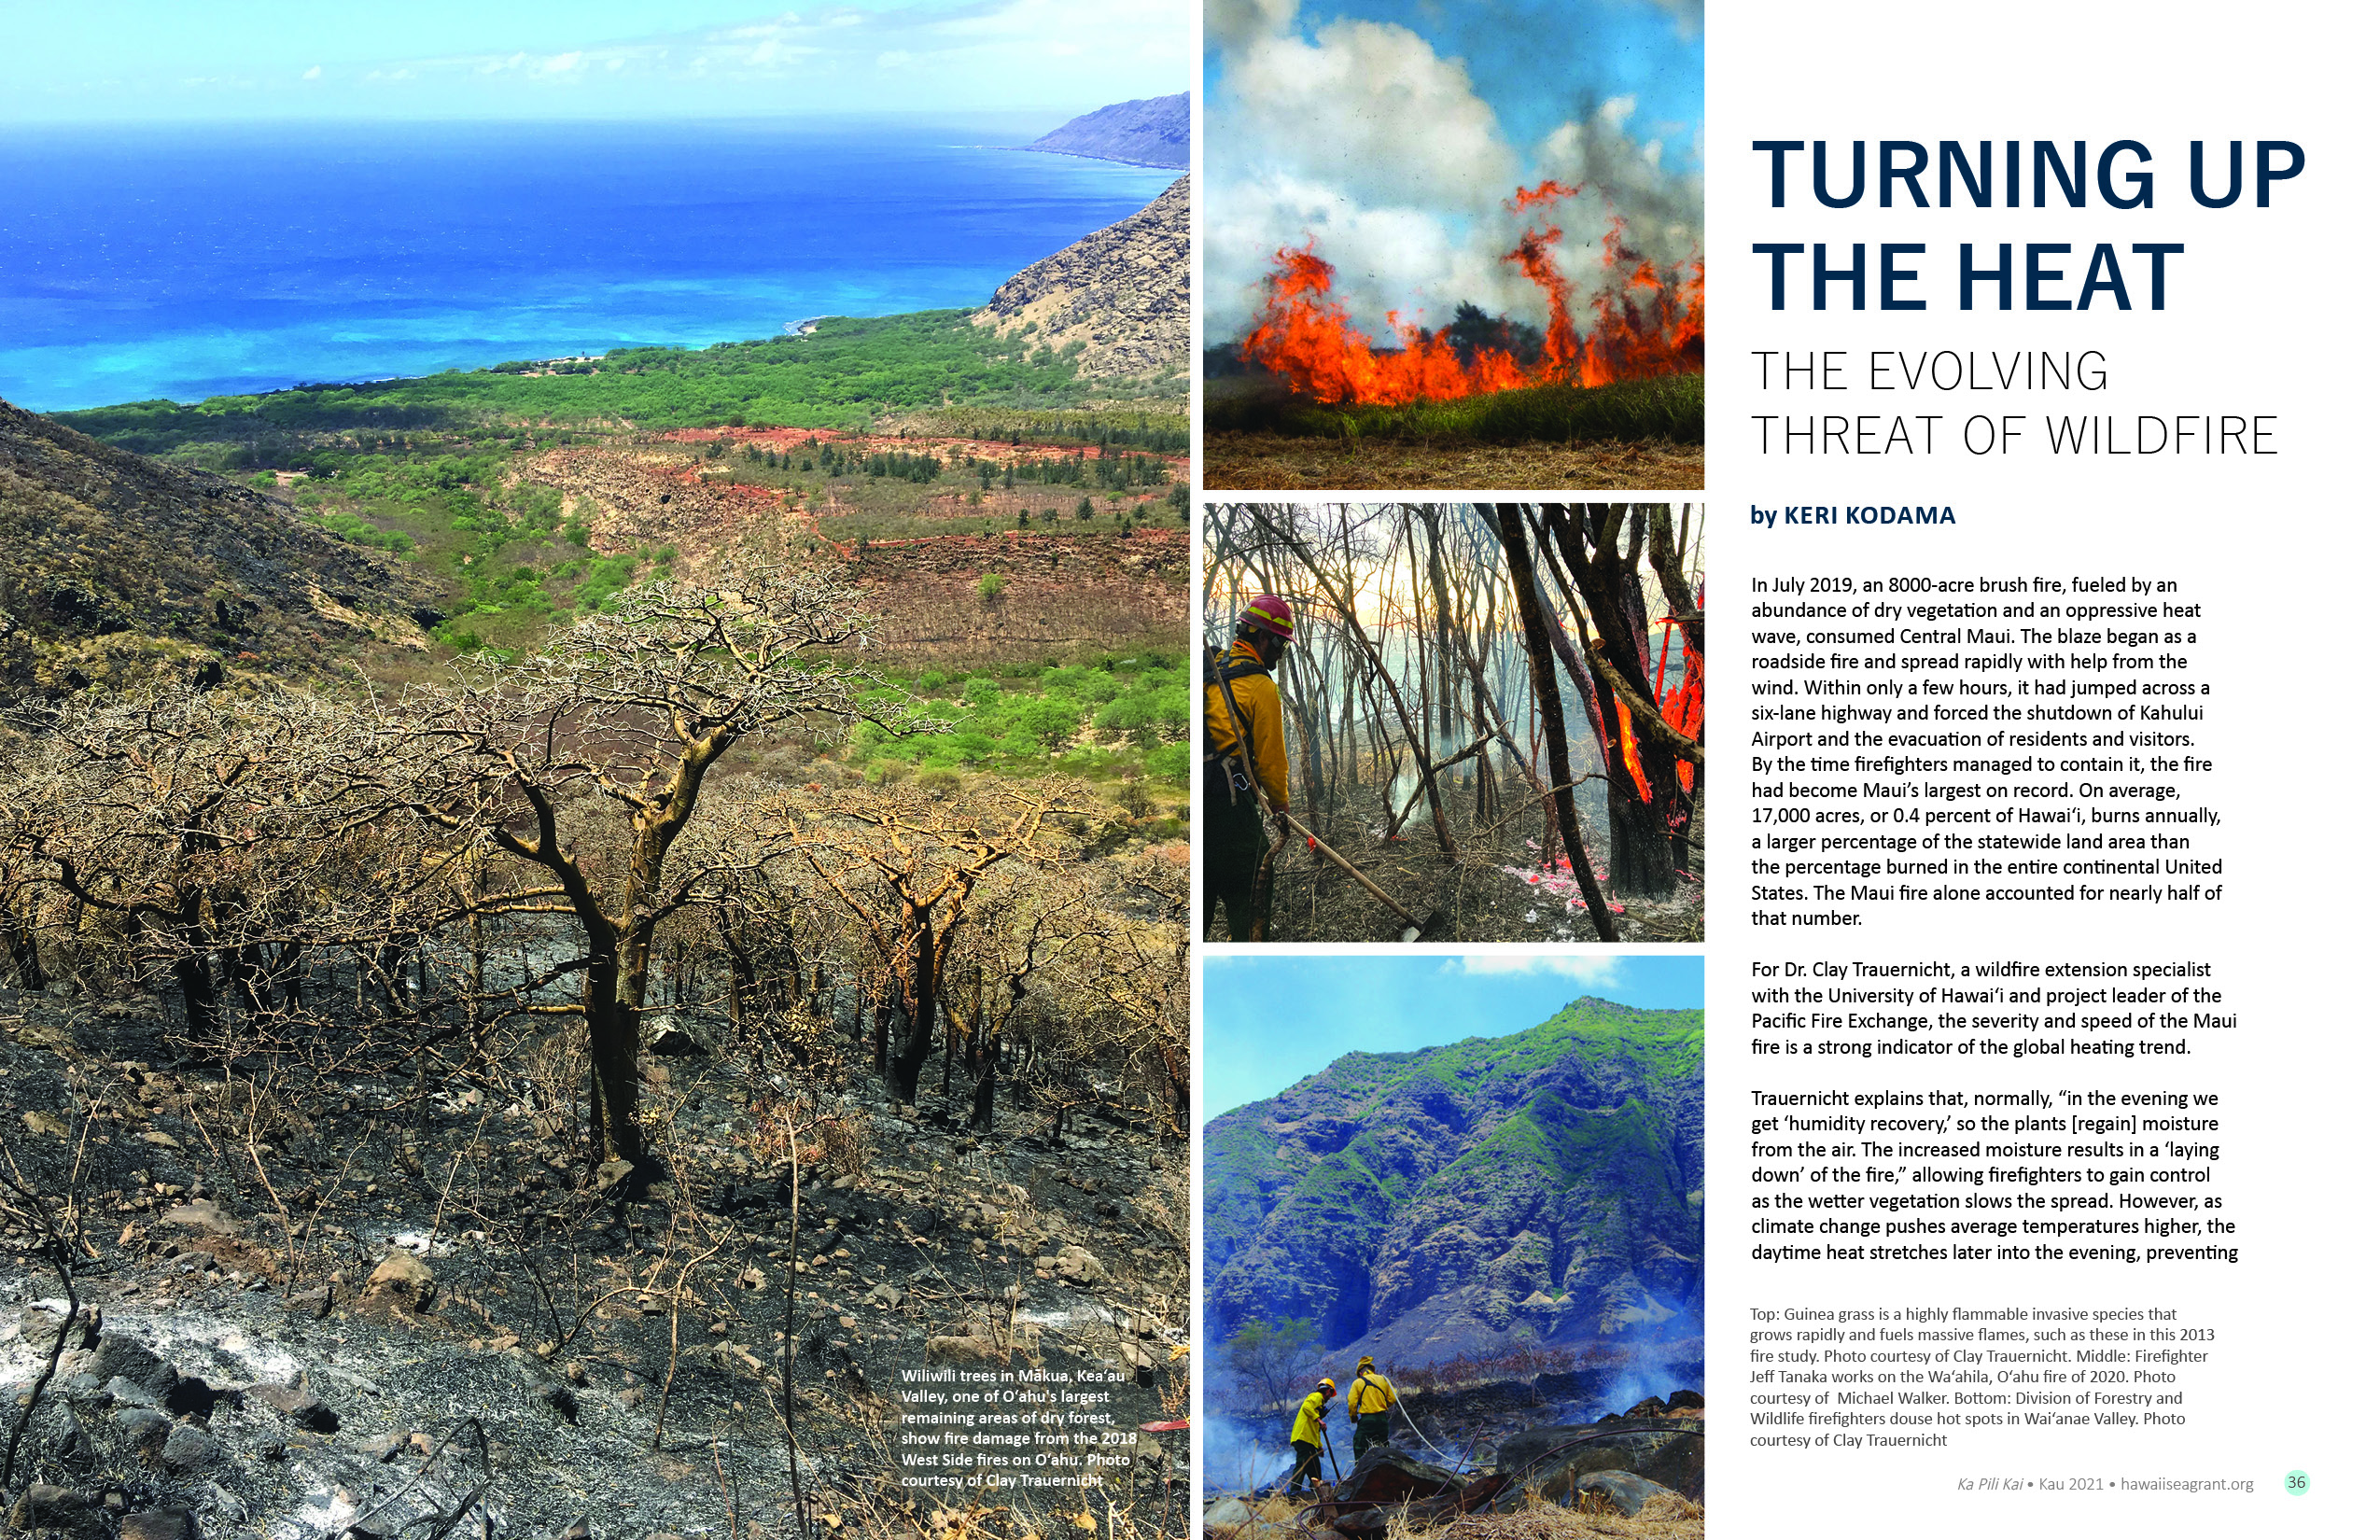 Article 'turning up the heat: the evolving threat of wildfire' by Keri Kodama. Includes images of fire damage on West Oahu